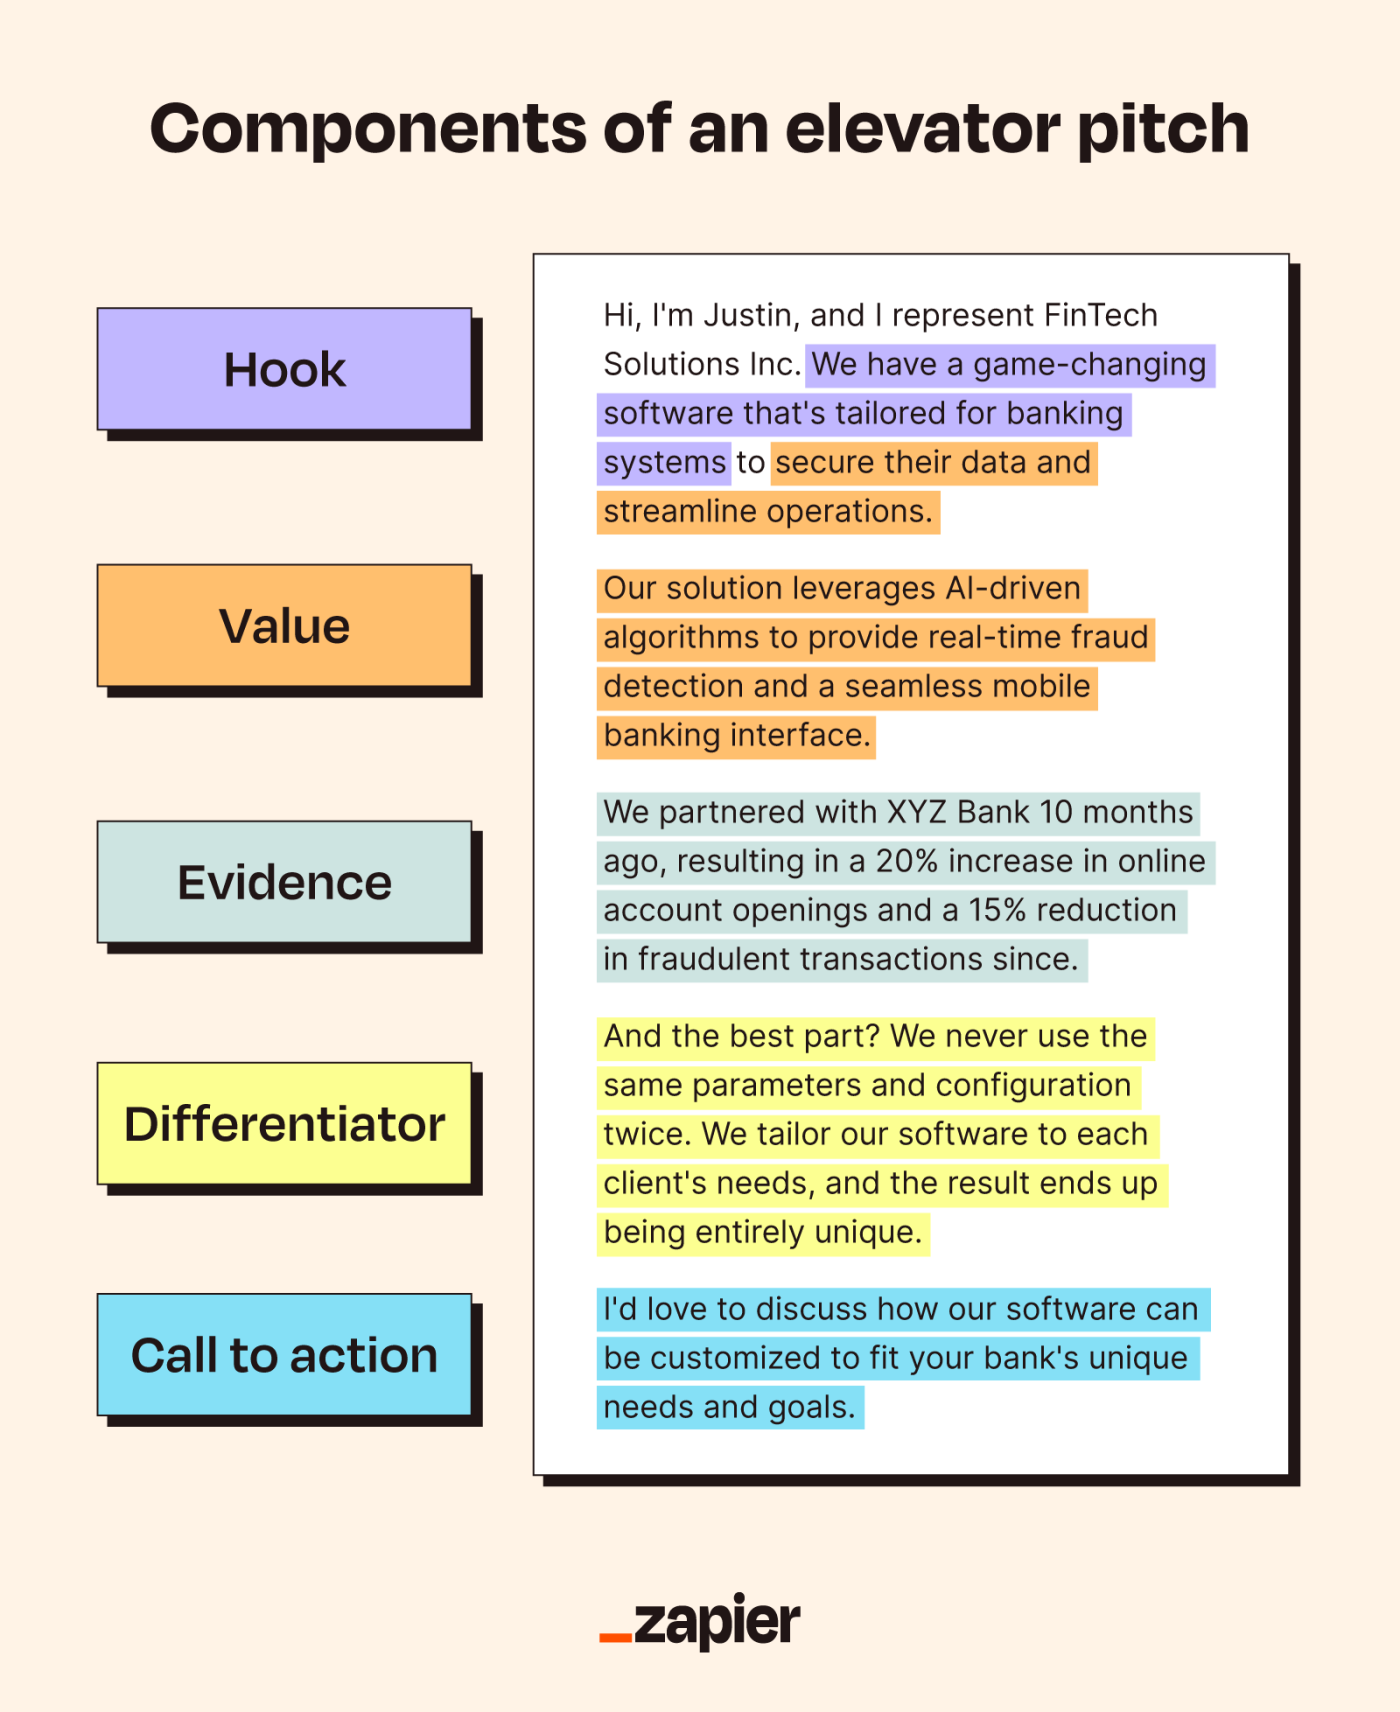 Example elevator pitch with the different components identified by color: the hook is highlighted in purple, value is highlighted in orange, evidence is highlighted in green, the differentiator is highlighted in yellow, and the call to action is highlighted in teal